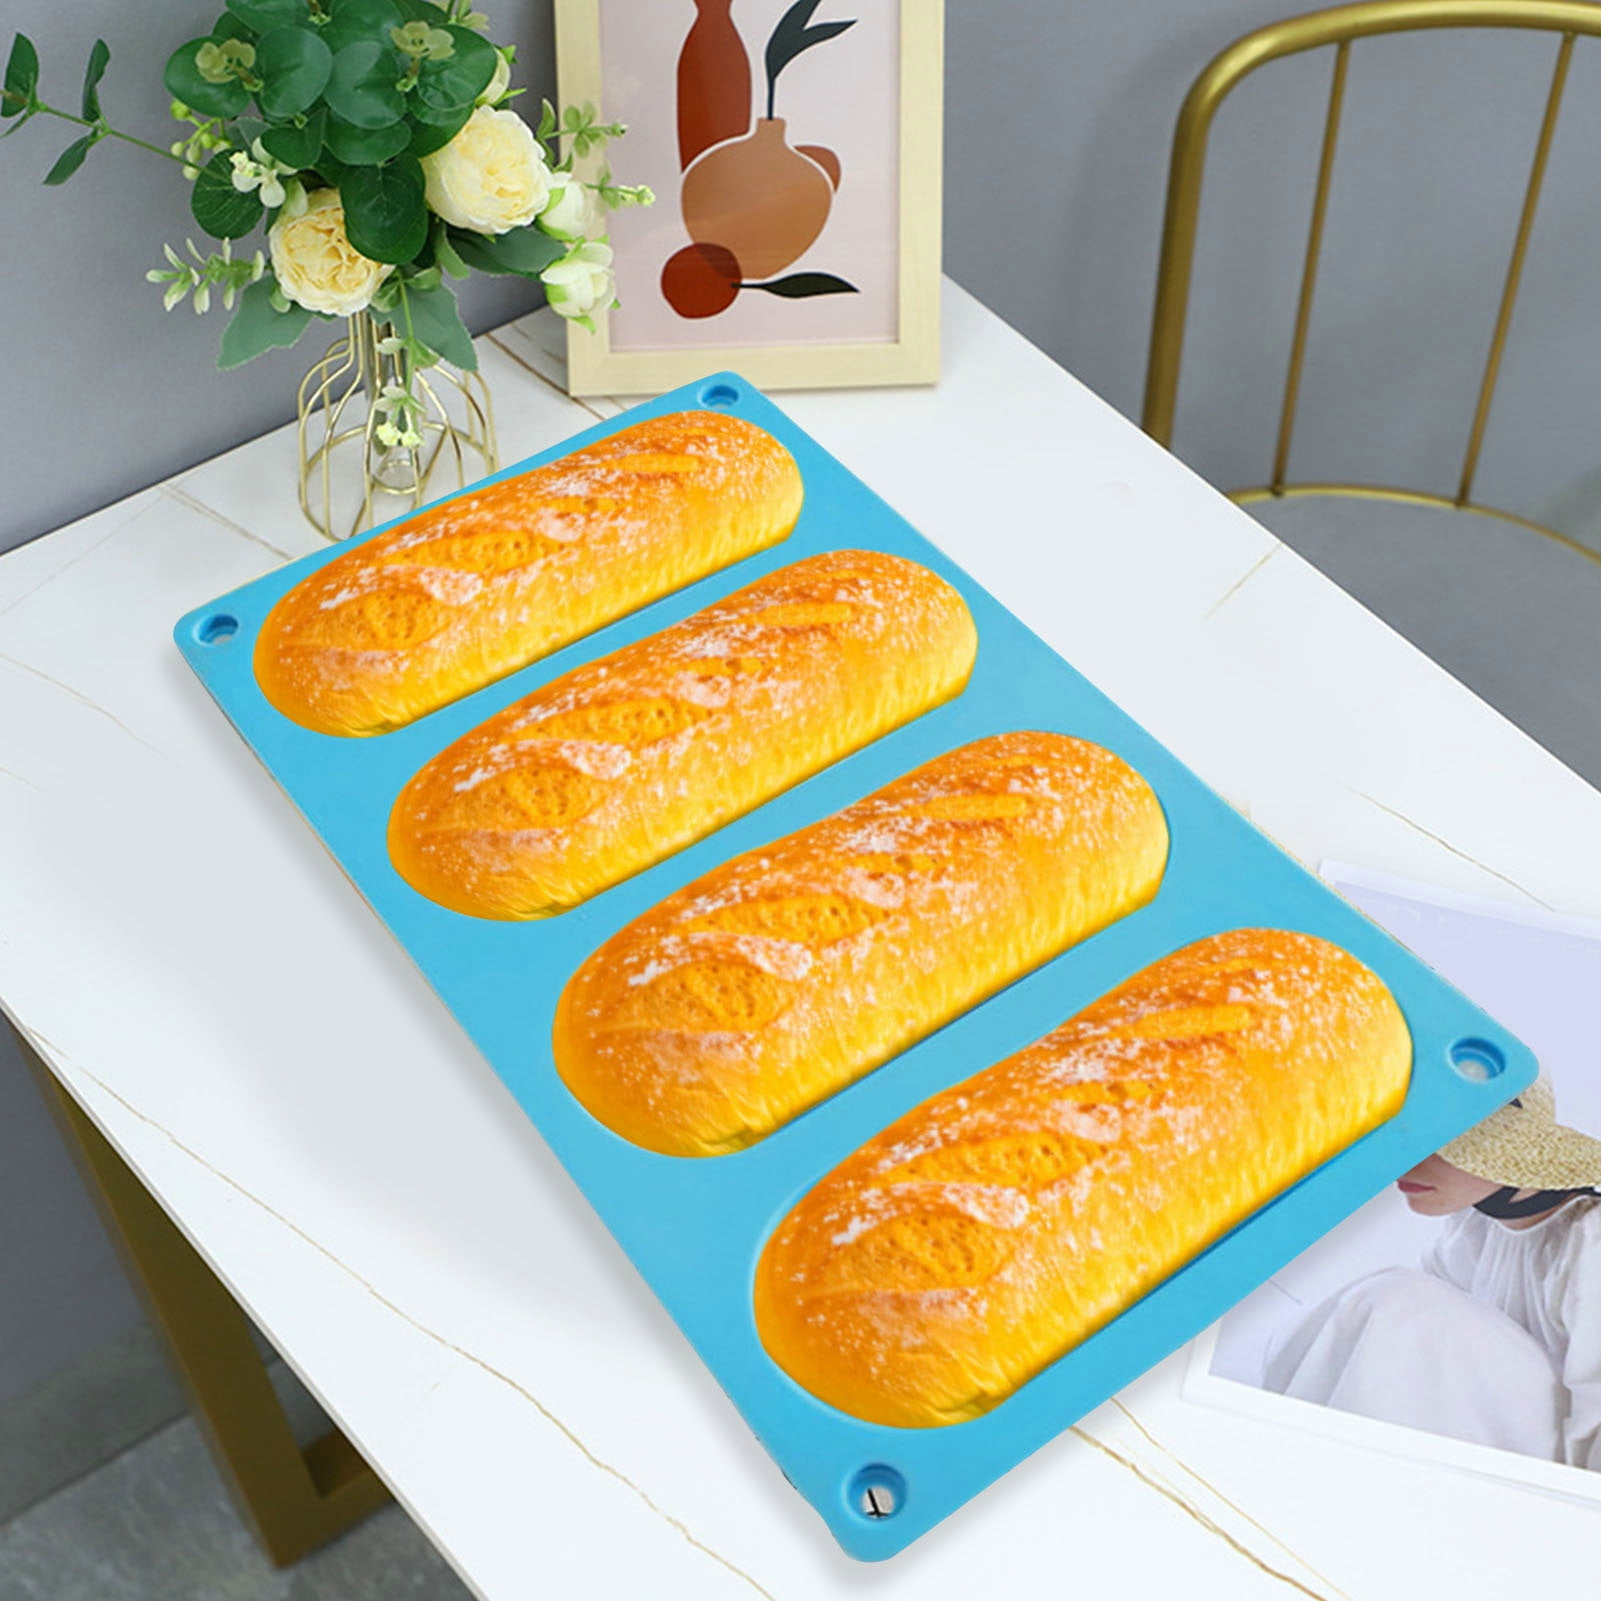 MUJUZE Silicone Loaf Pan Baking Pan for Baking French Baguettes/Hot Dog  Buns, bread mold for baking with 6 Muffin Cups,Nonstick &Easy Clean&Heat